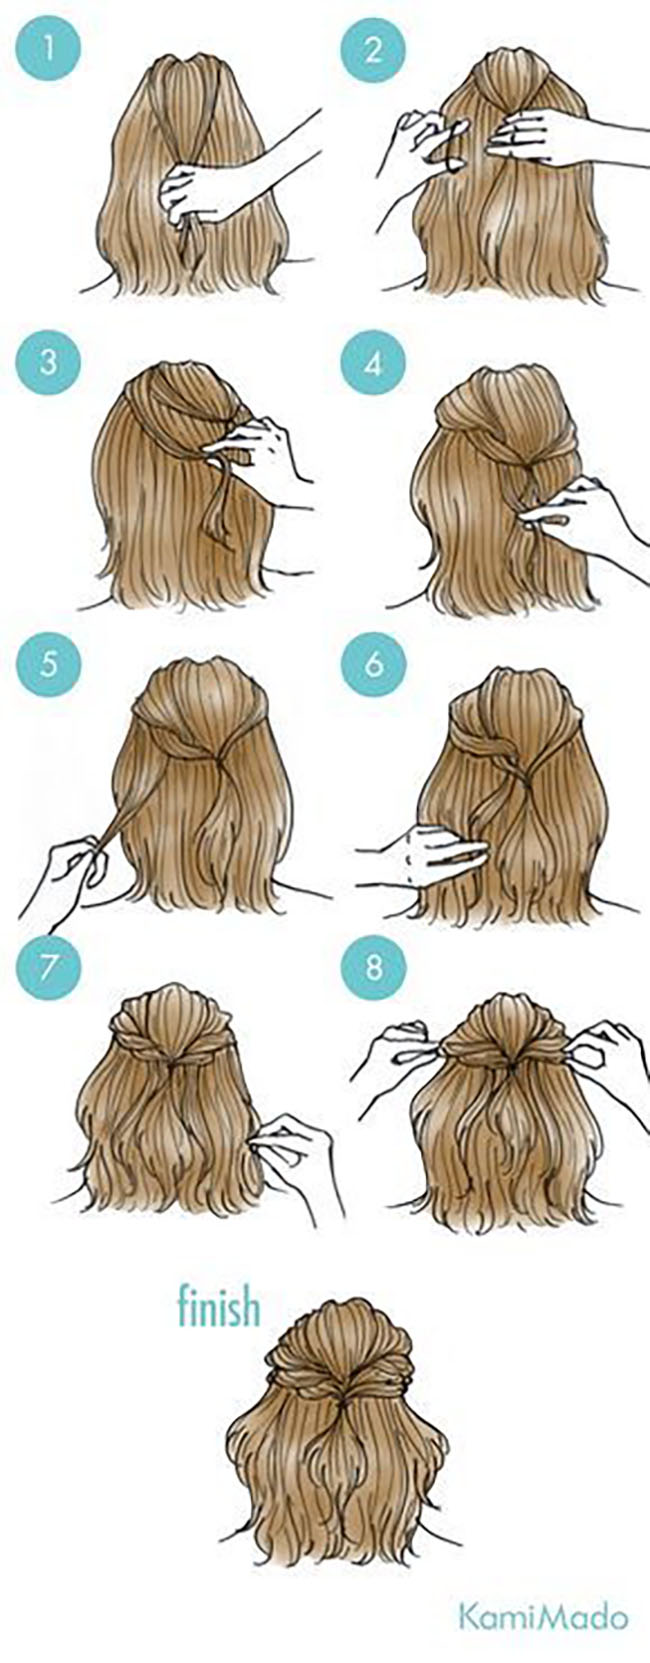 What are some quick, cute hairstyles for shoulder-length hair? - Quora